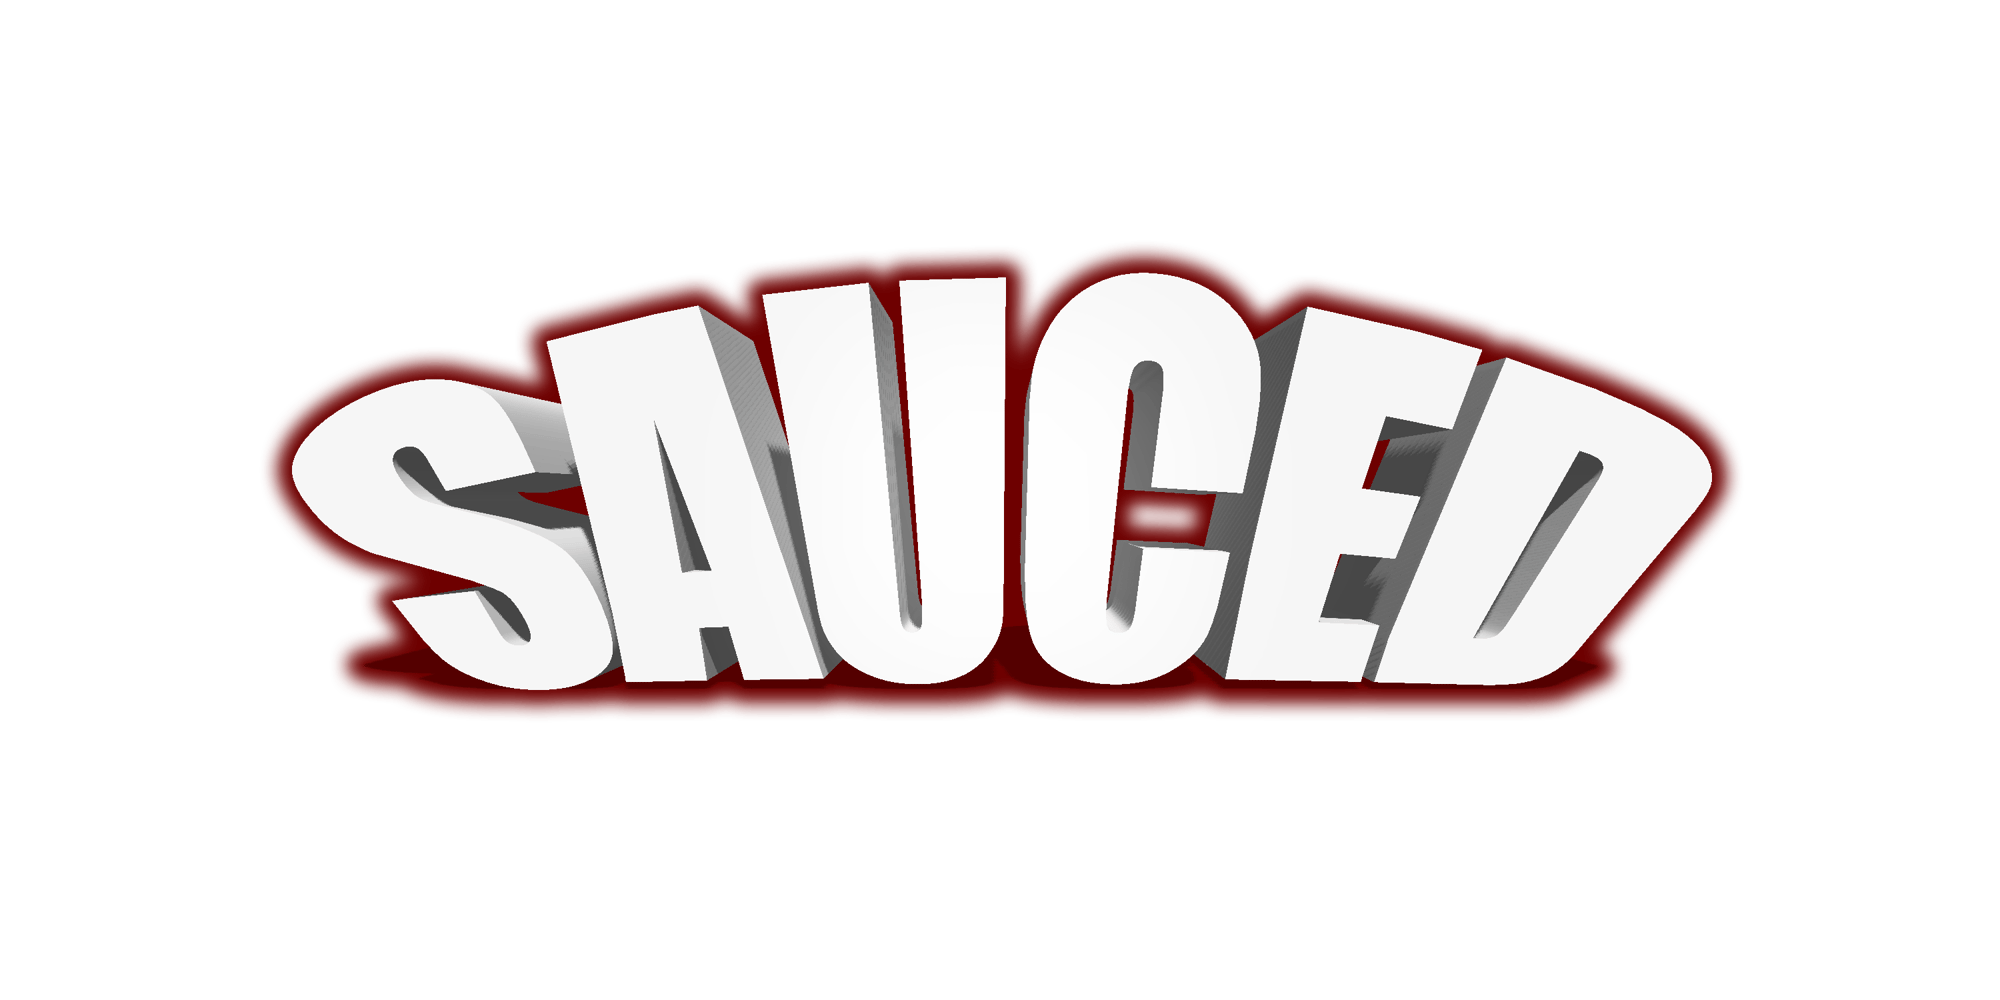 Welcome to Sauced Stance